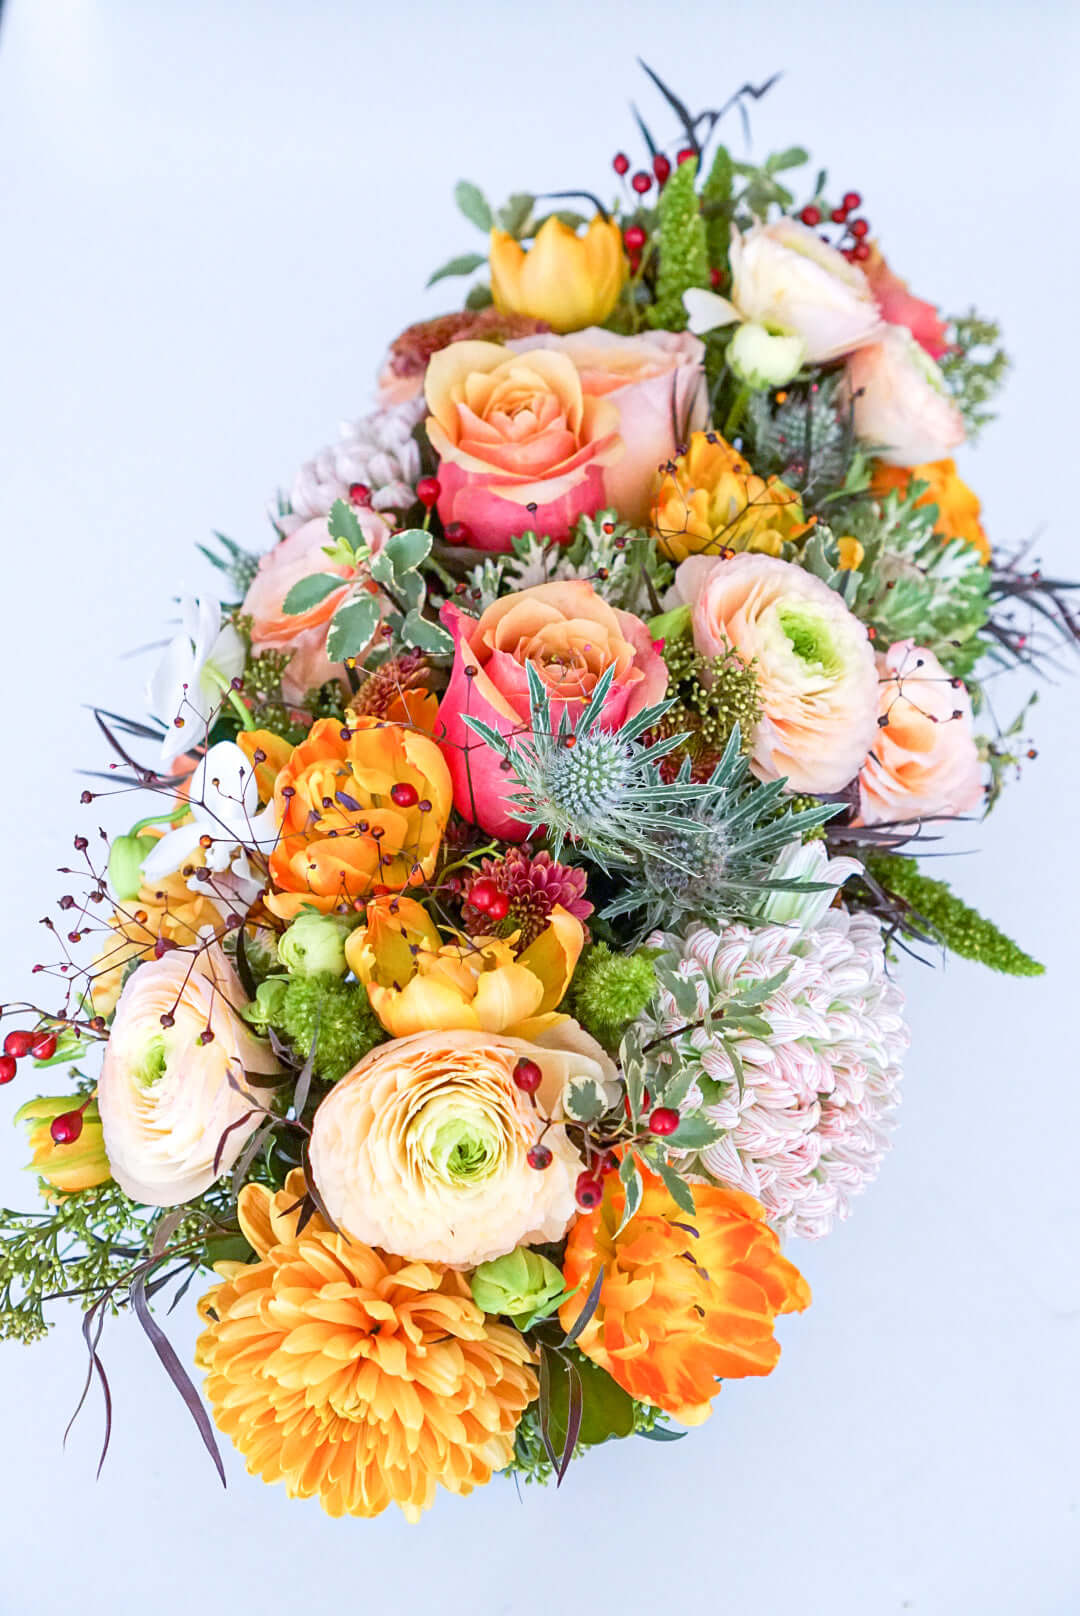 Add some glow to your Thanksgiving dinner table or fall-decorated foyer with this warm, seasonal arrangement. This Thanksgiving centerpiece features candy crush commercial mum, bi-colour roses, bronze mum, cabbage bloom, peach ranunculus, rosehips, and bronze tulips. 